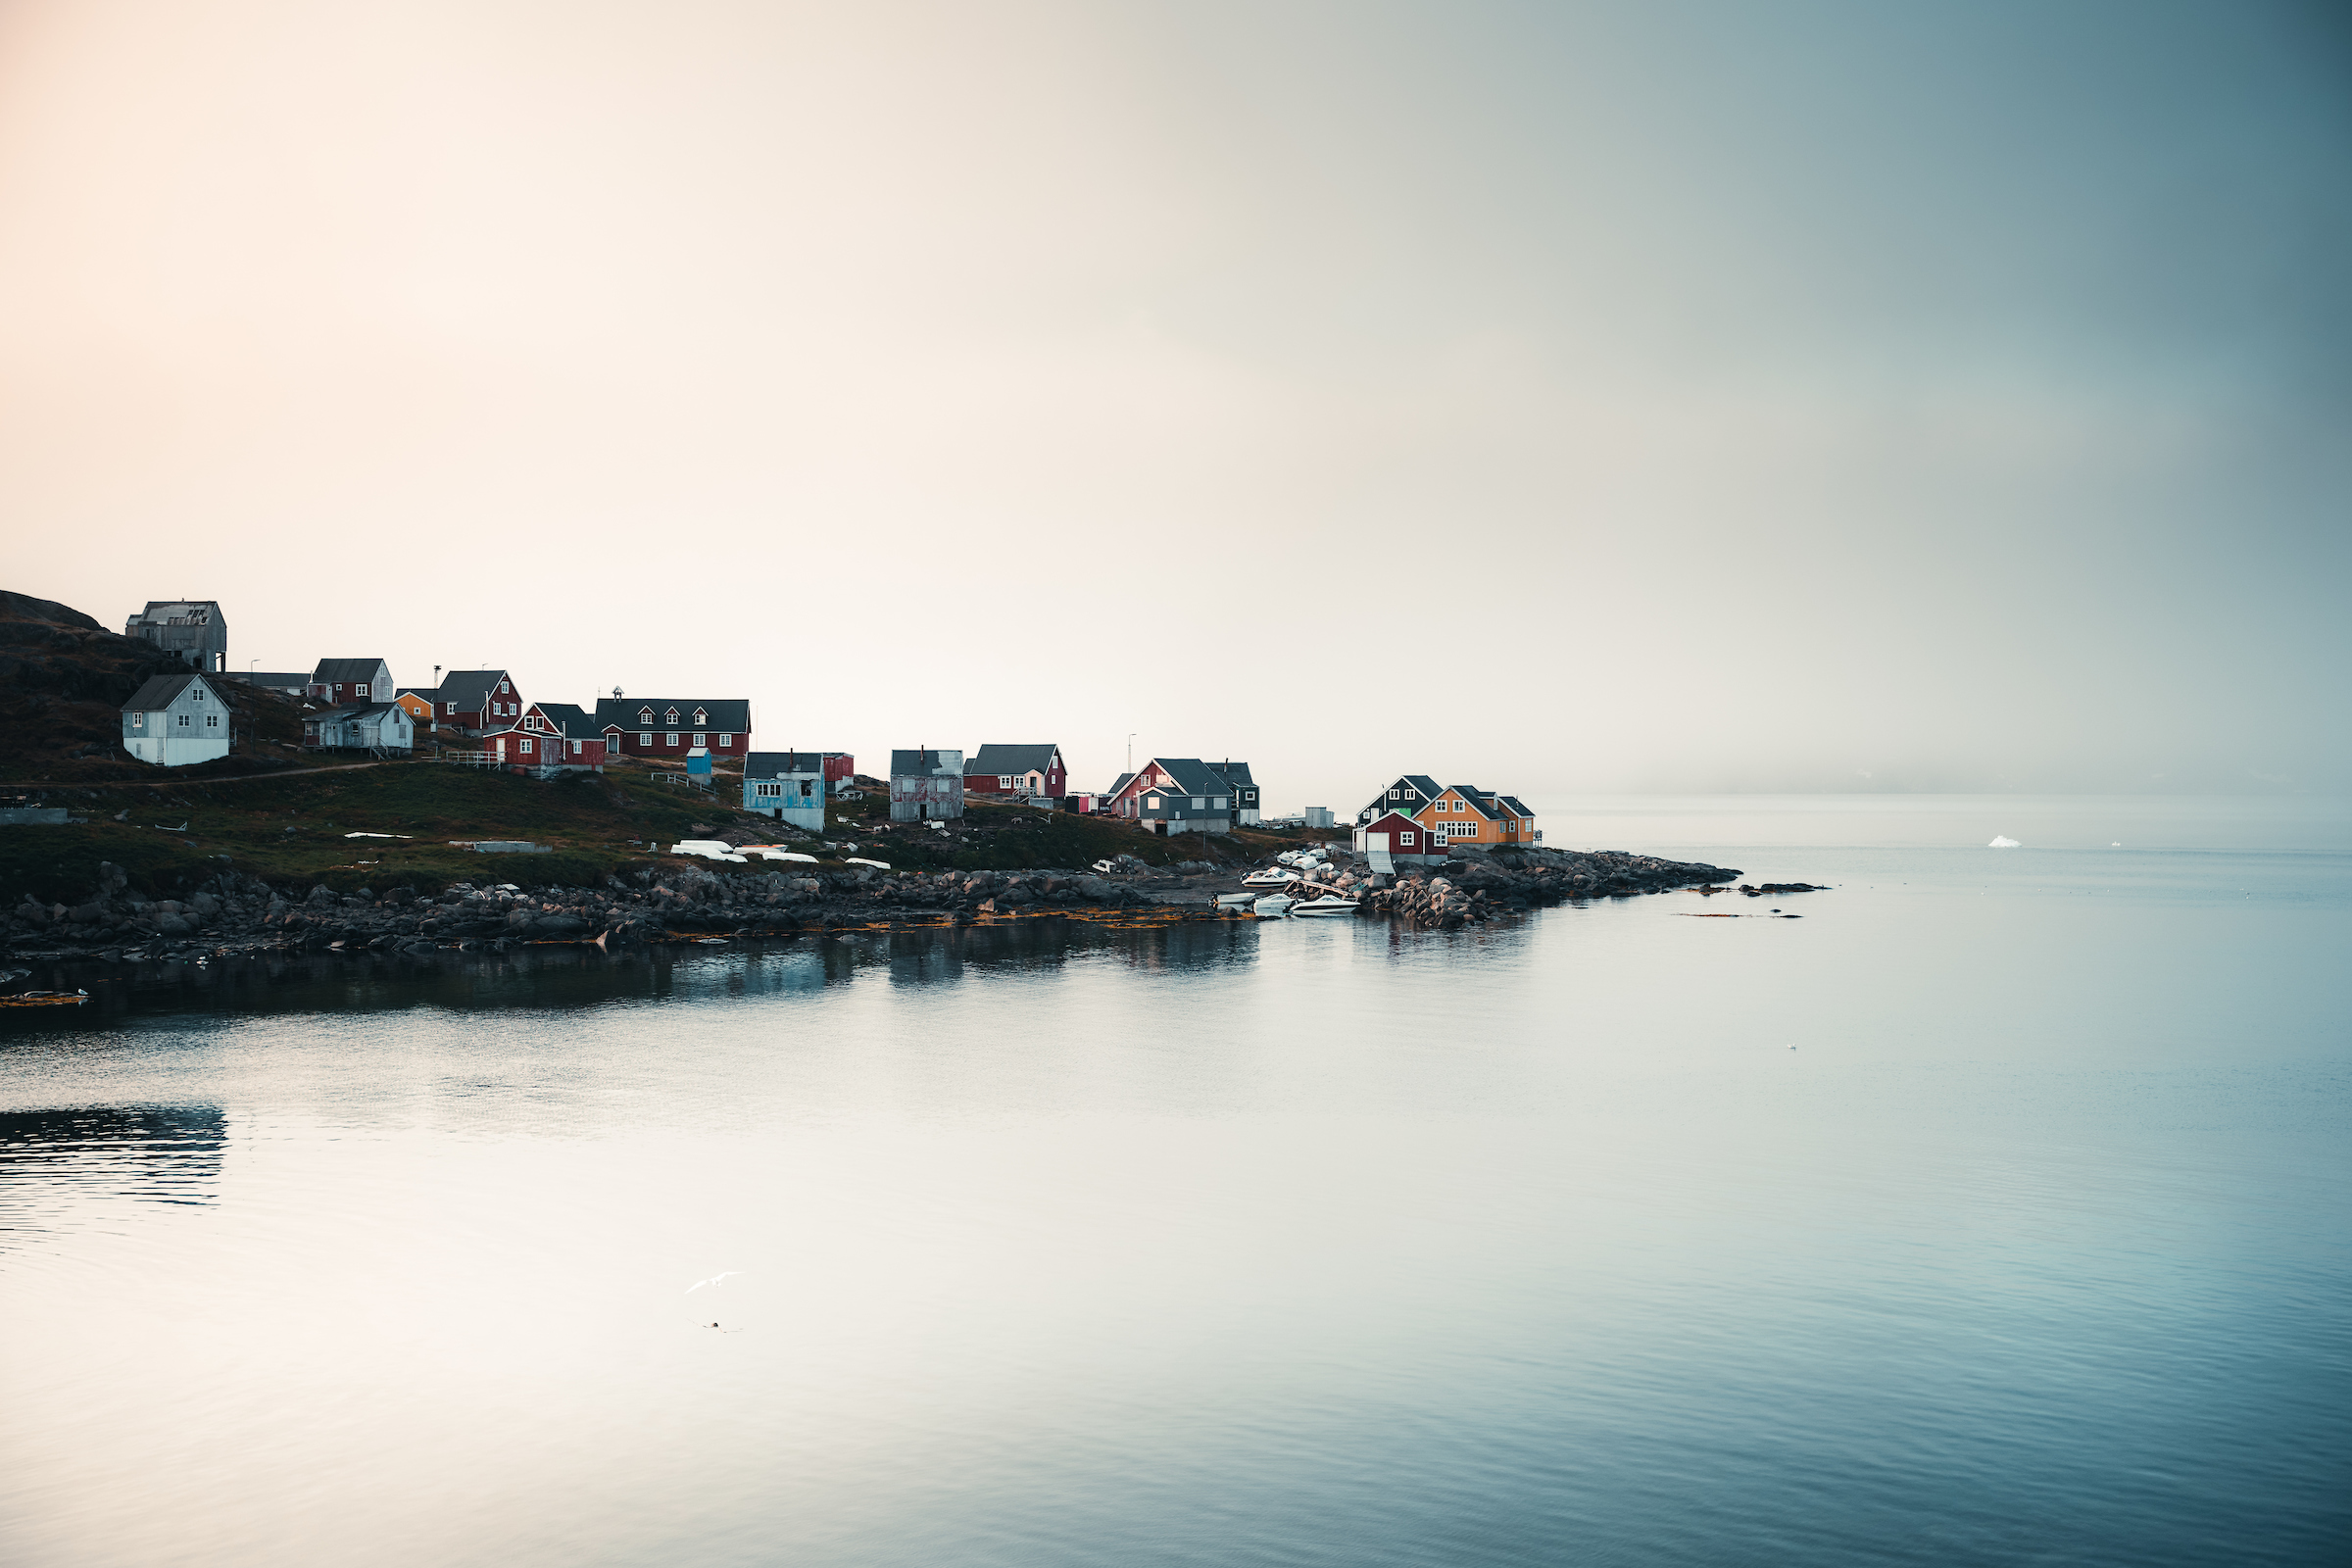 Where the town is the only thing separating the sky from the sea. Photo by Norris Niman - Visit Greenland